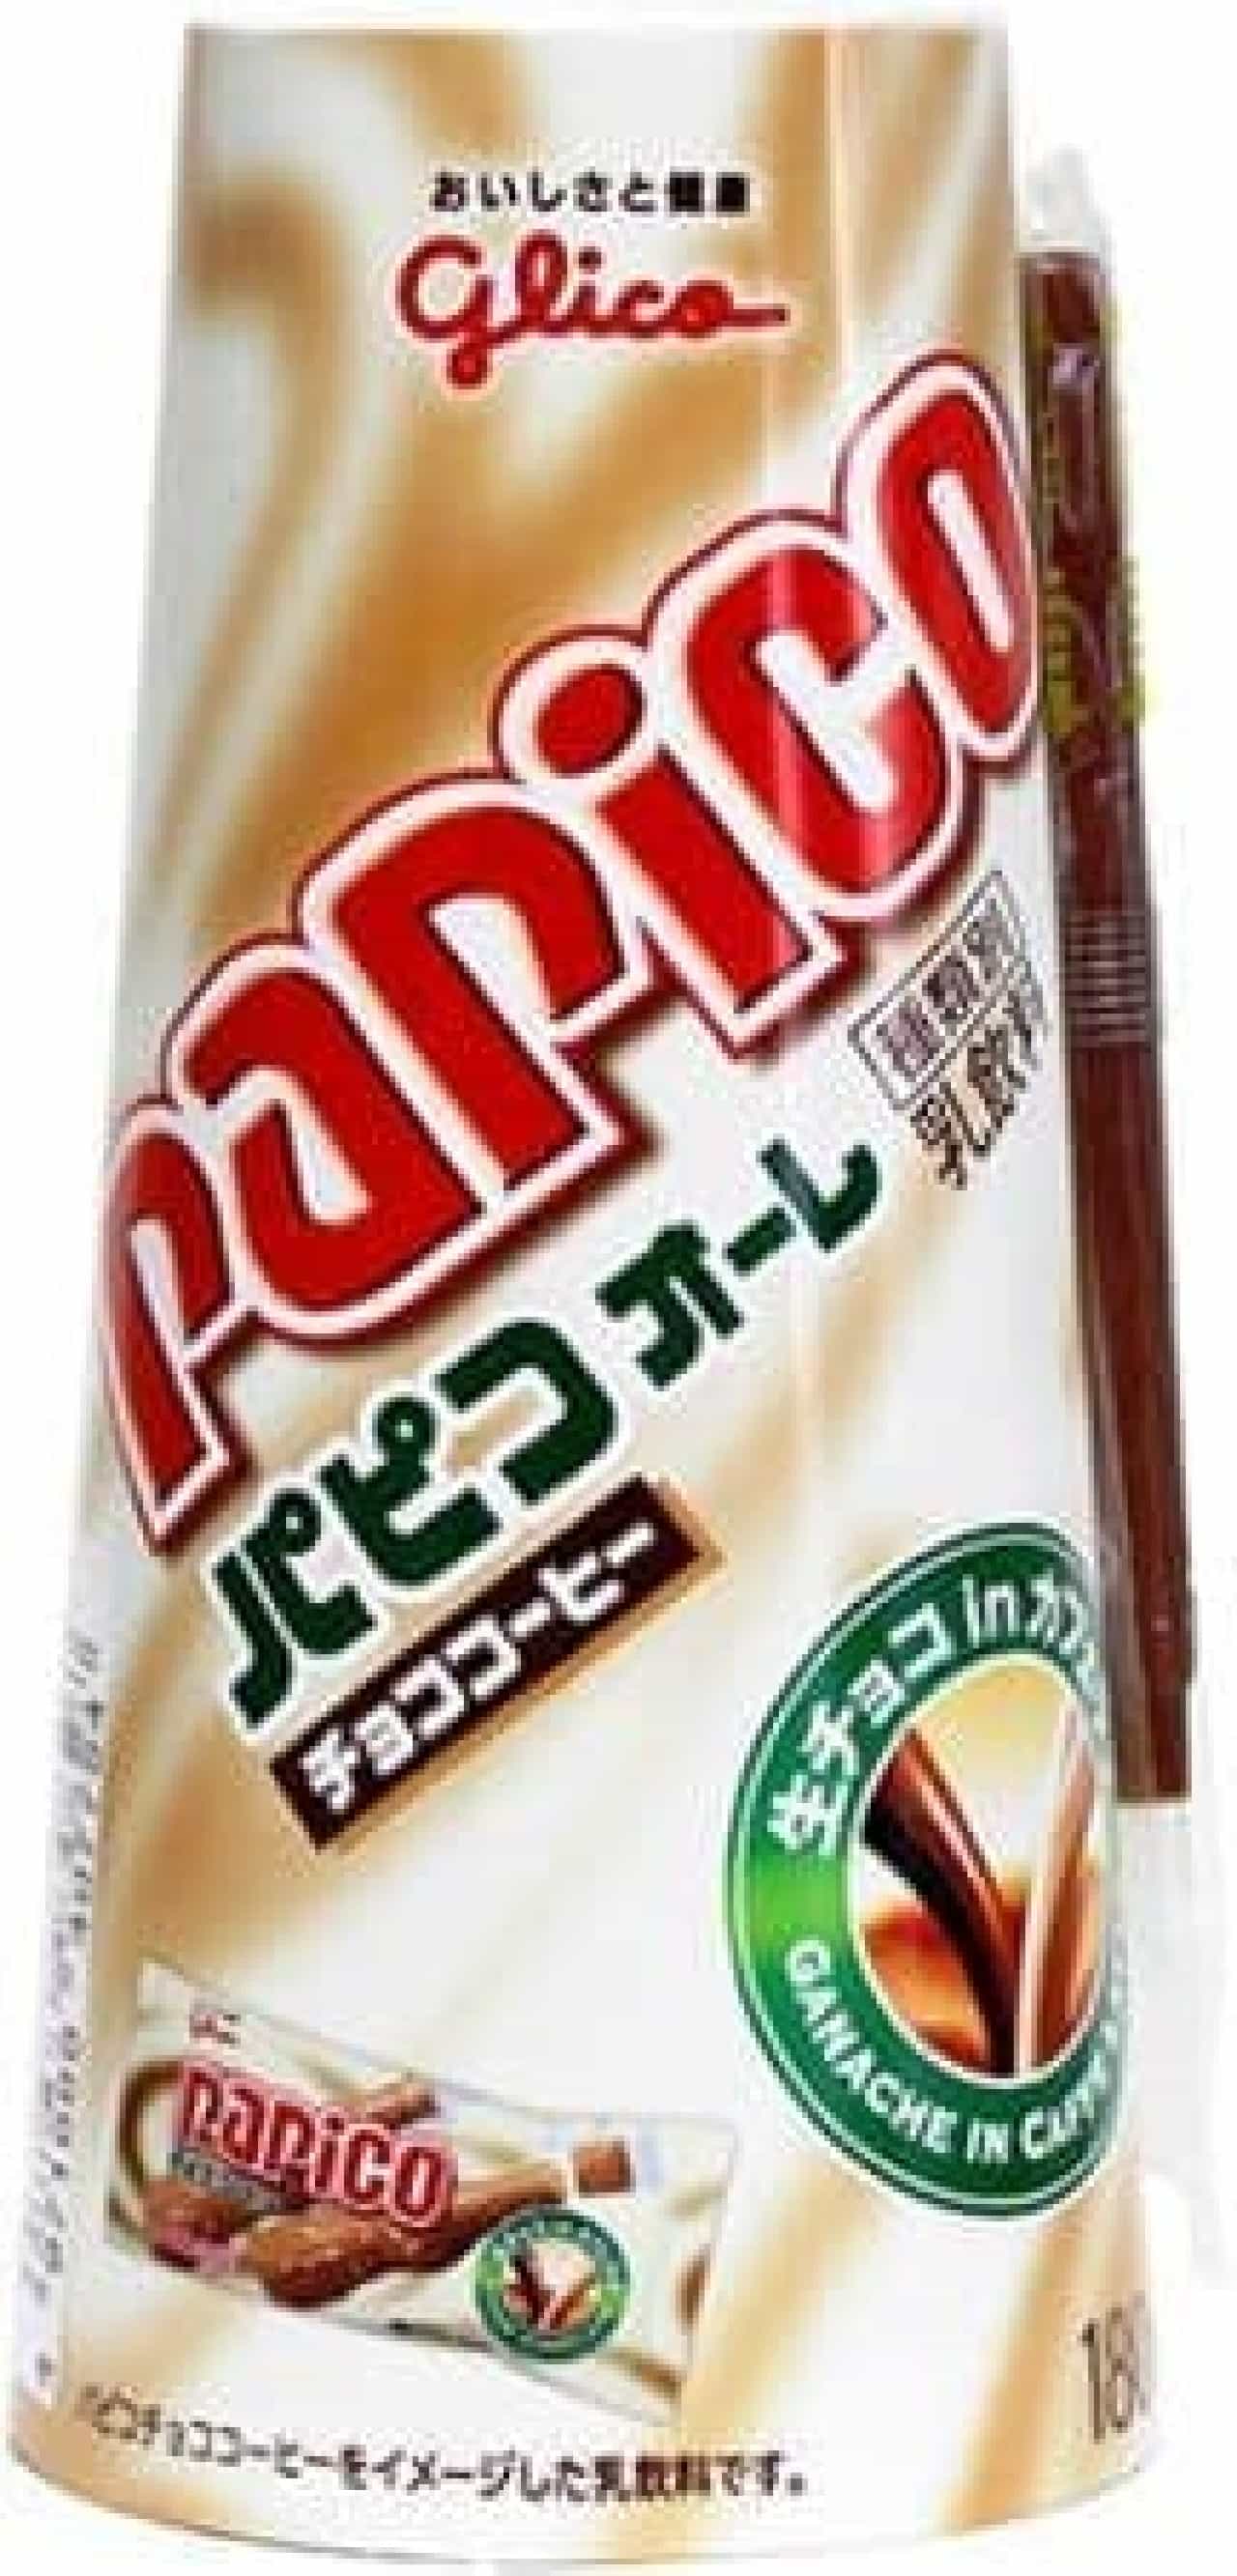 The package is also like "Papico"!